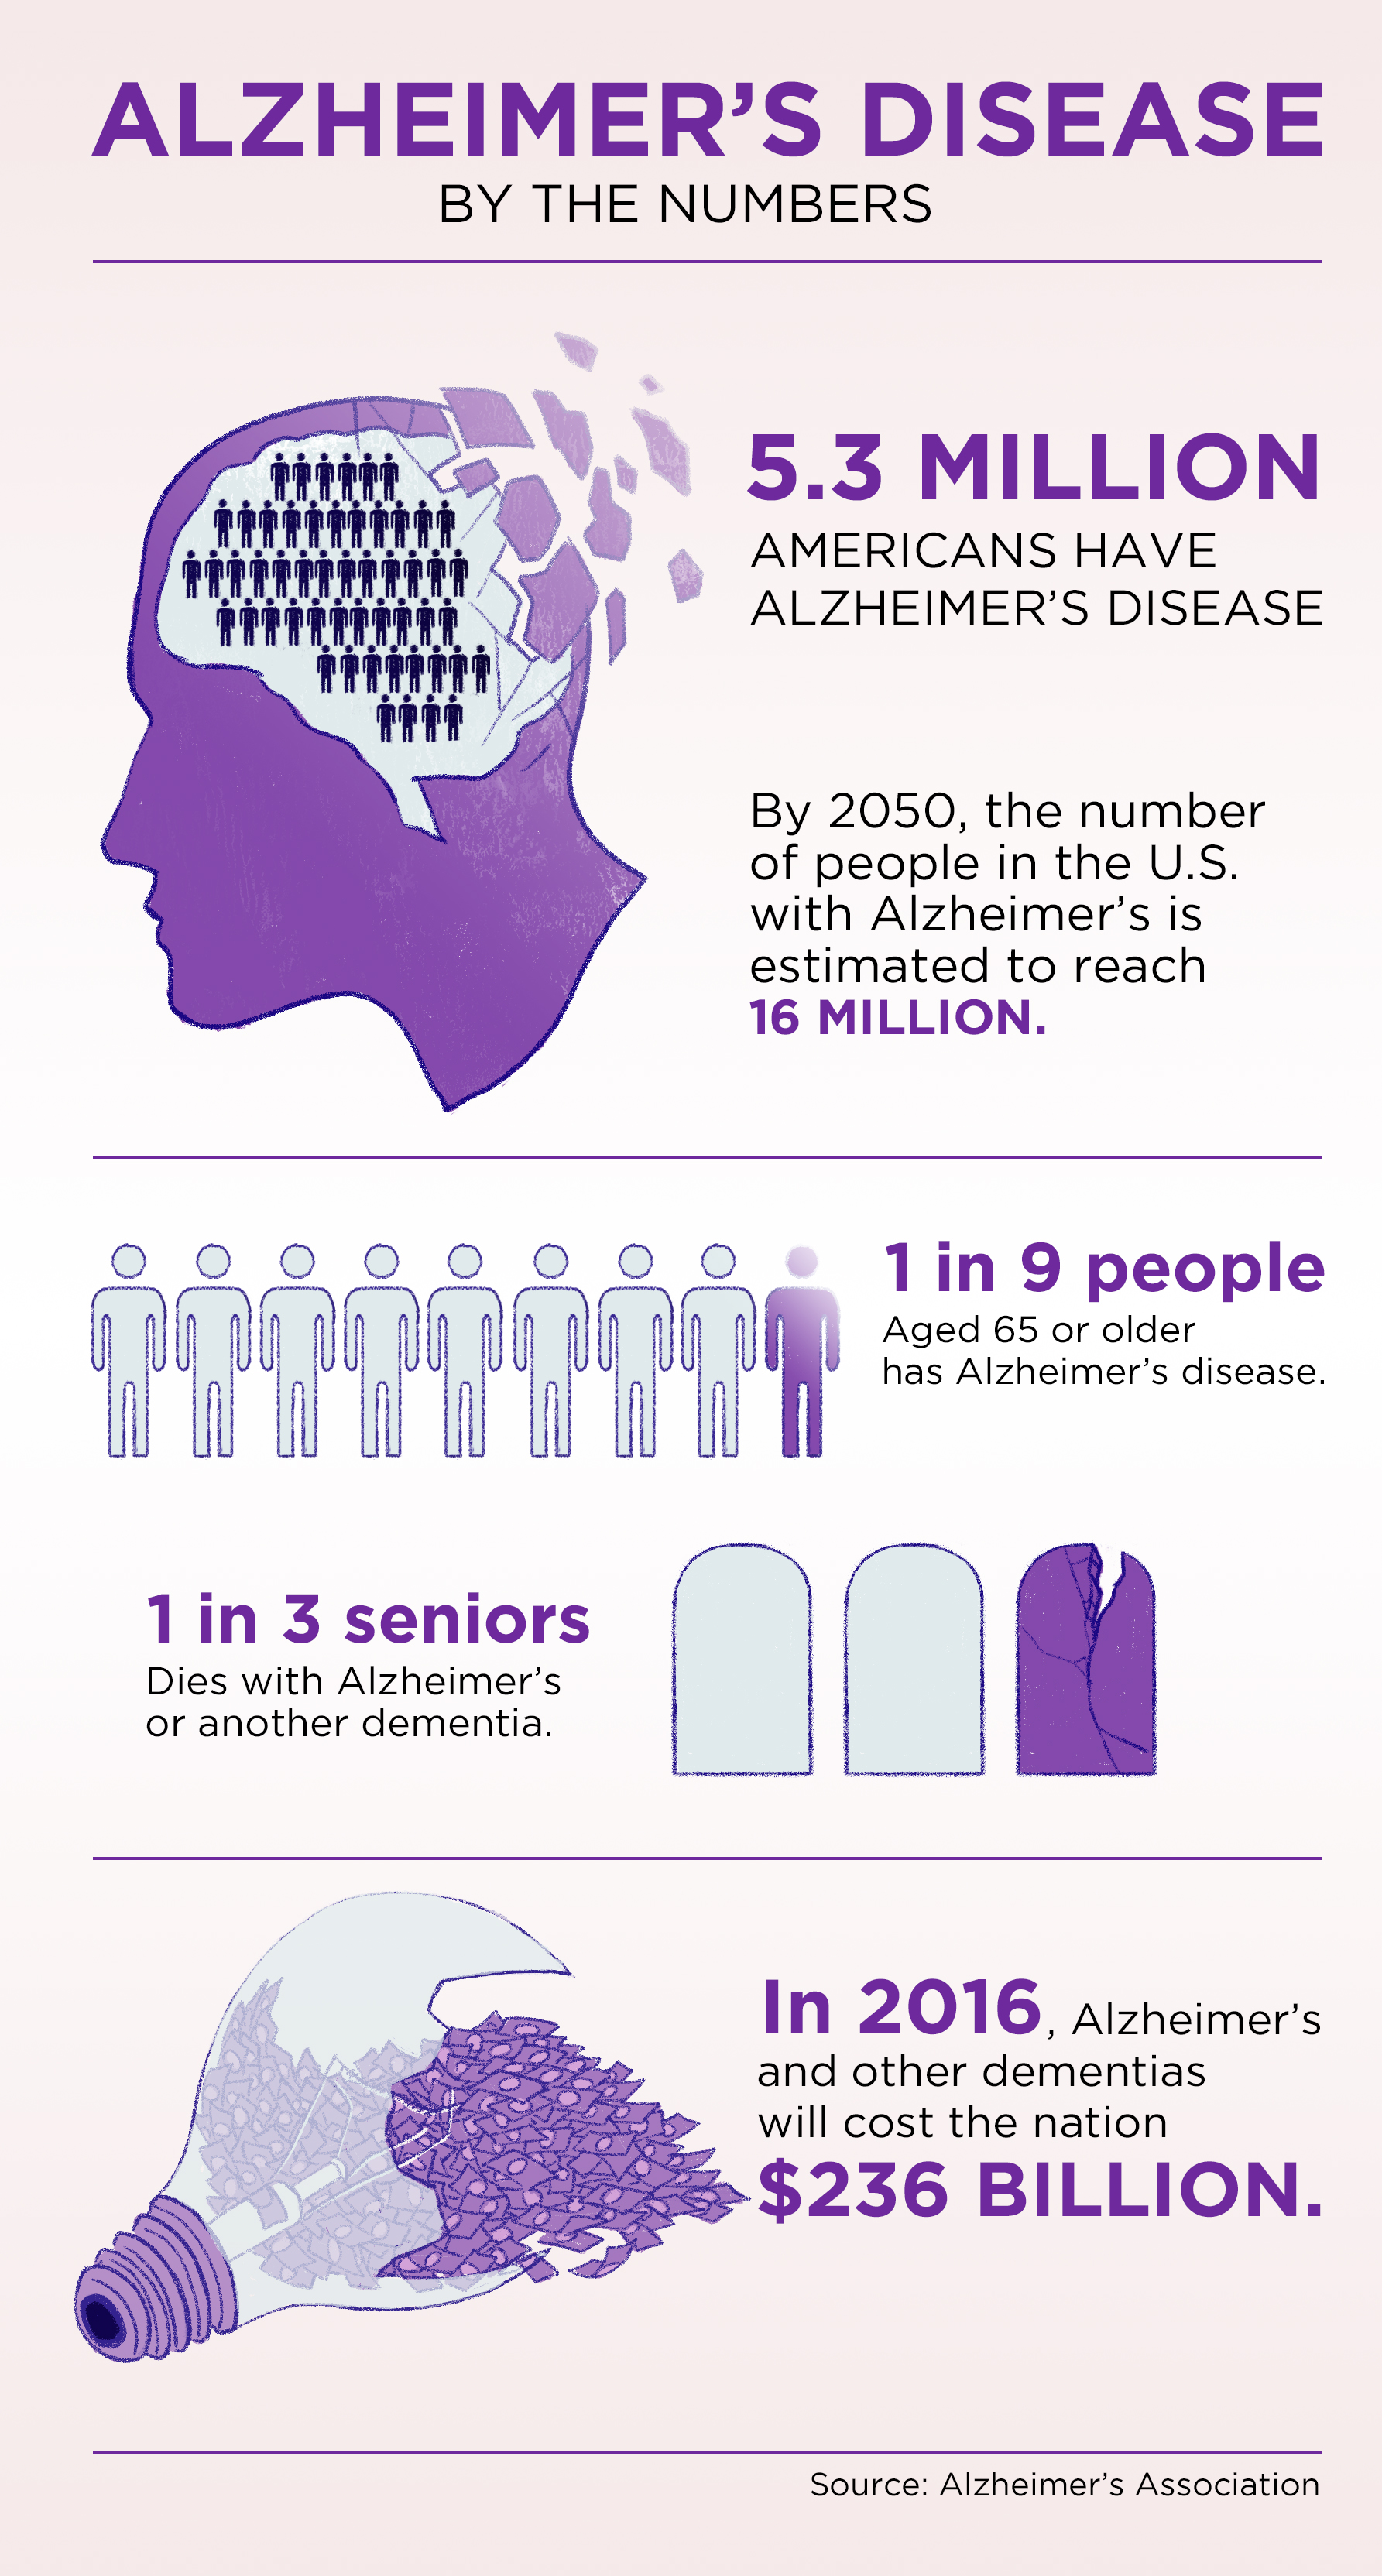 What are the most notable advancements in biotechnology for alzheimer's patients?